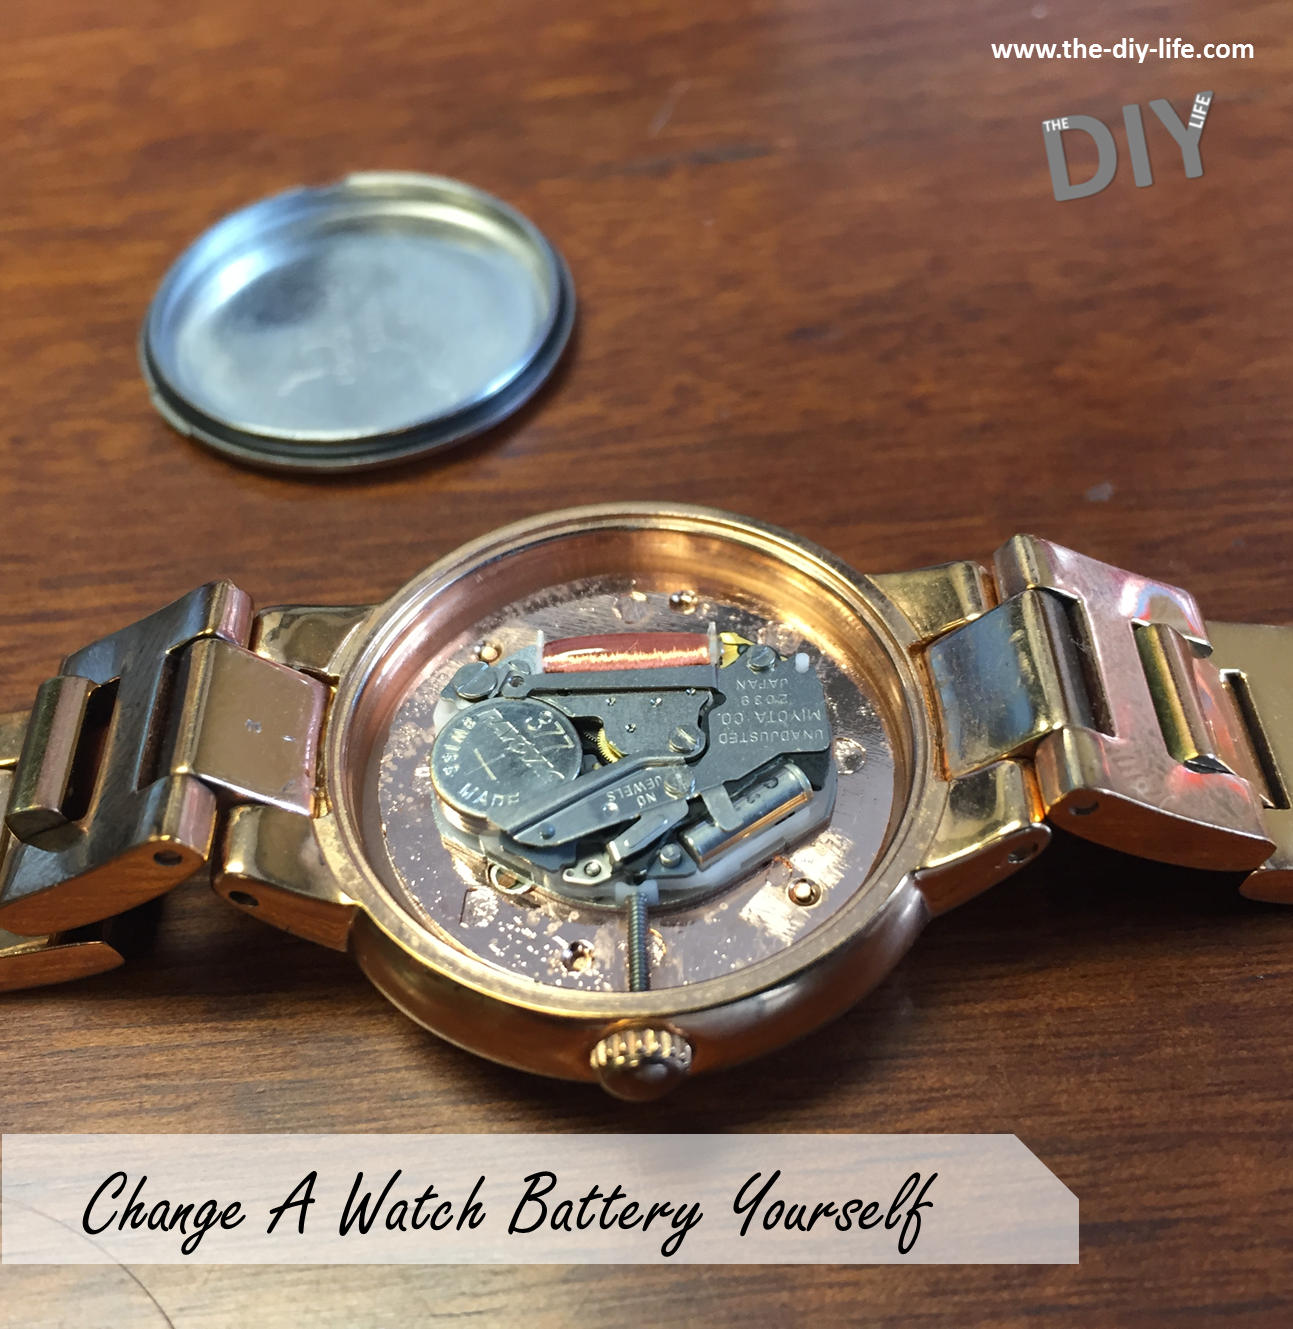 change-a-watch-battery-yourself